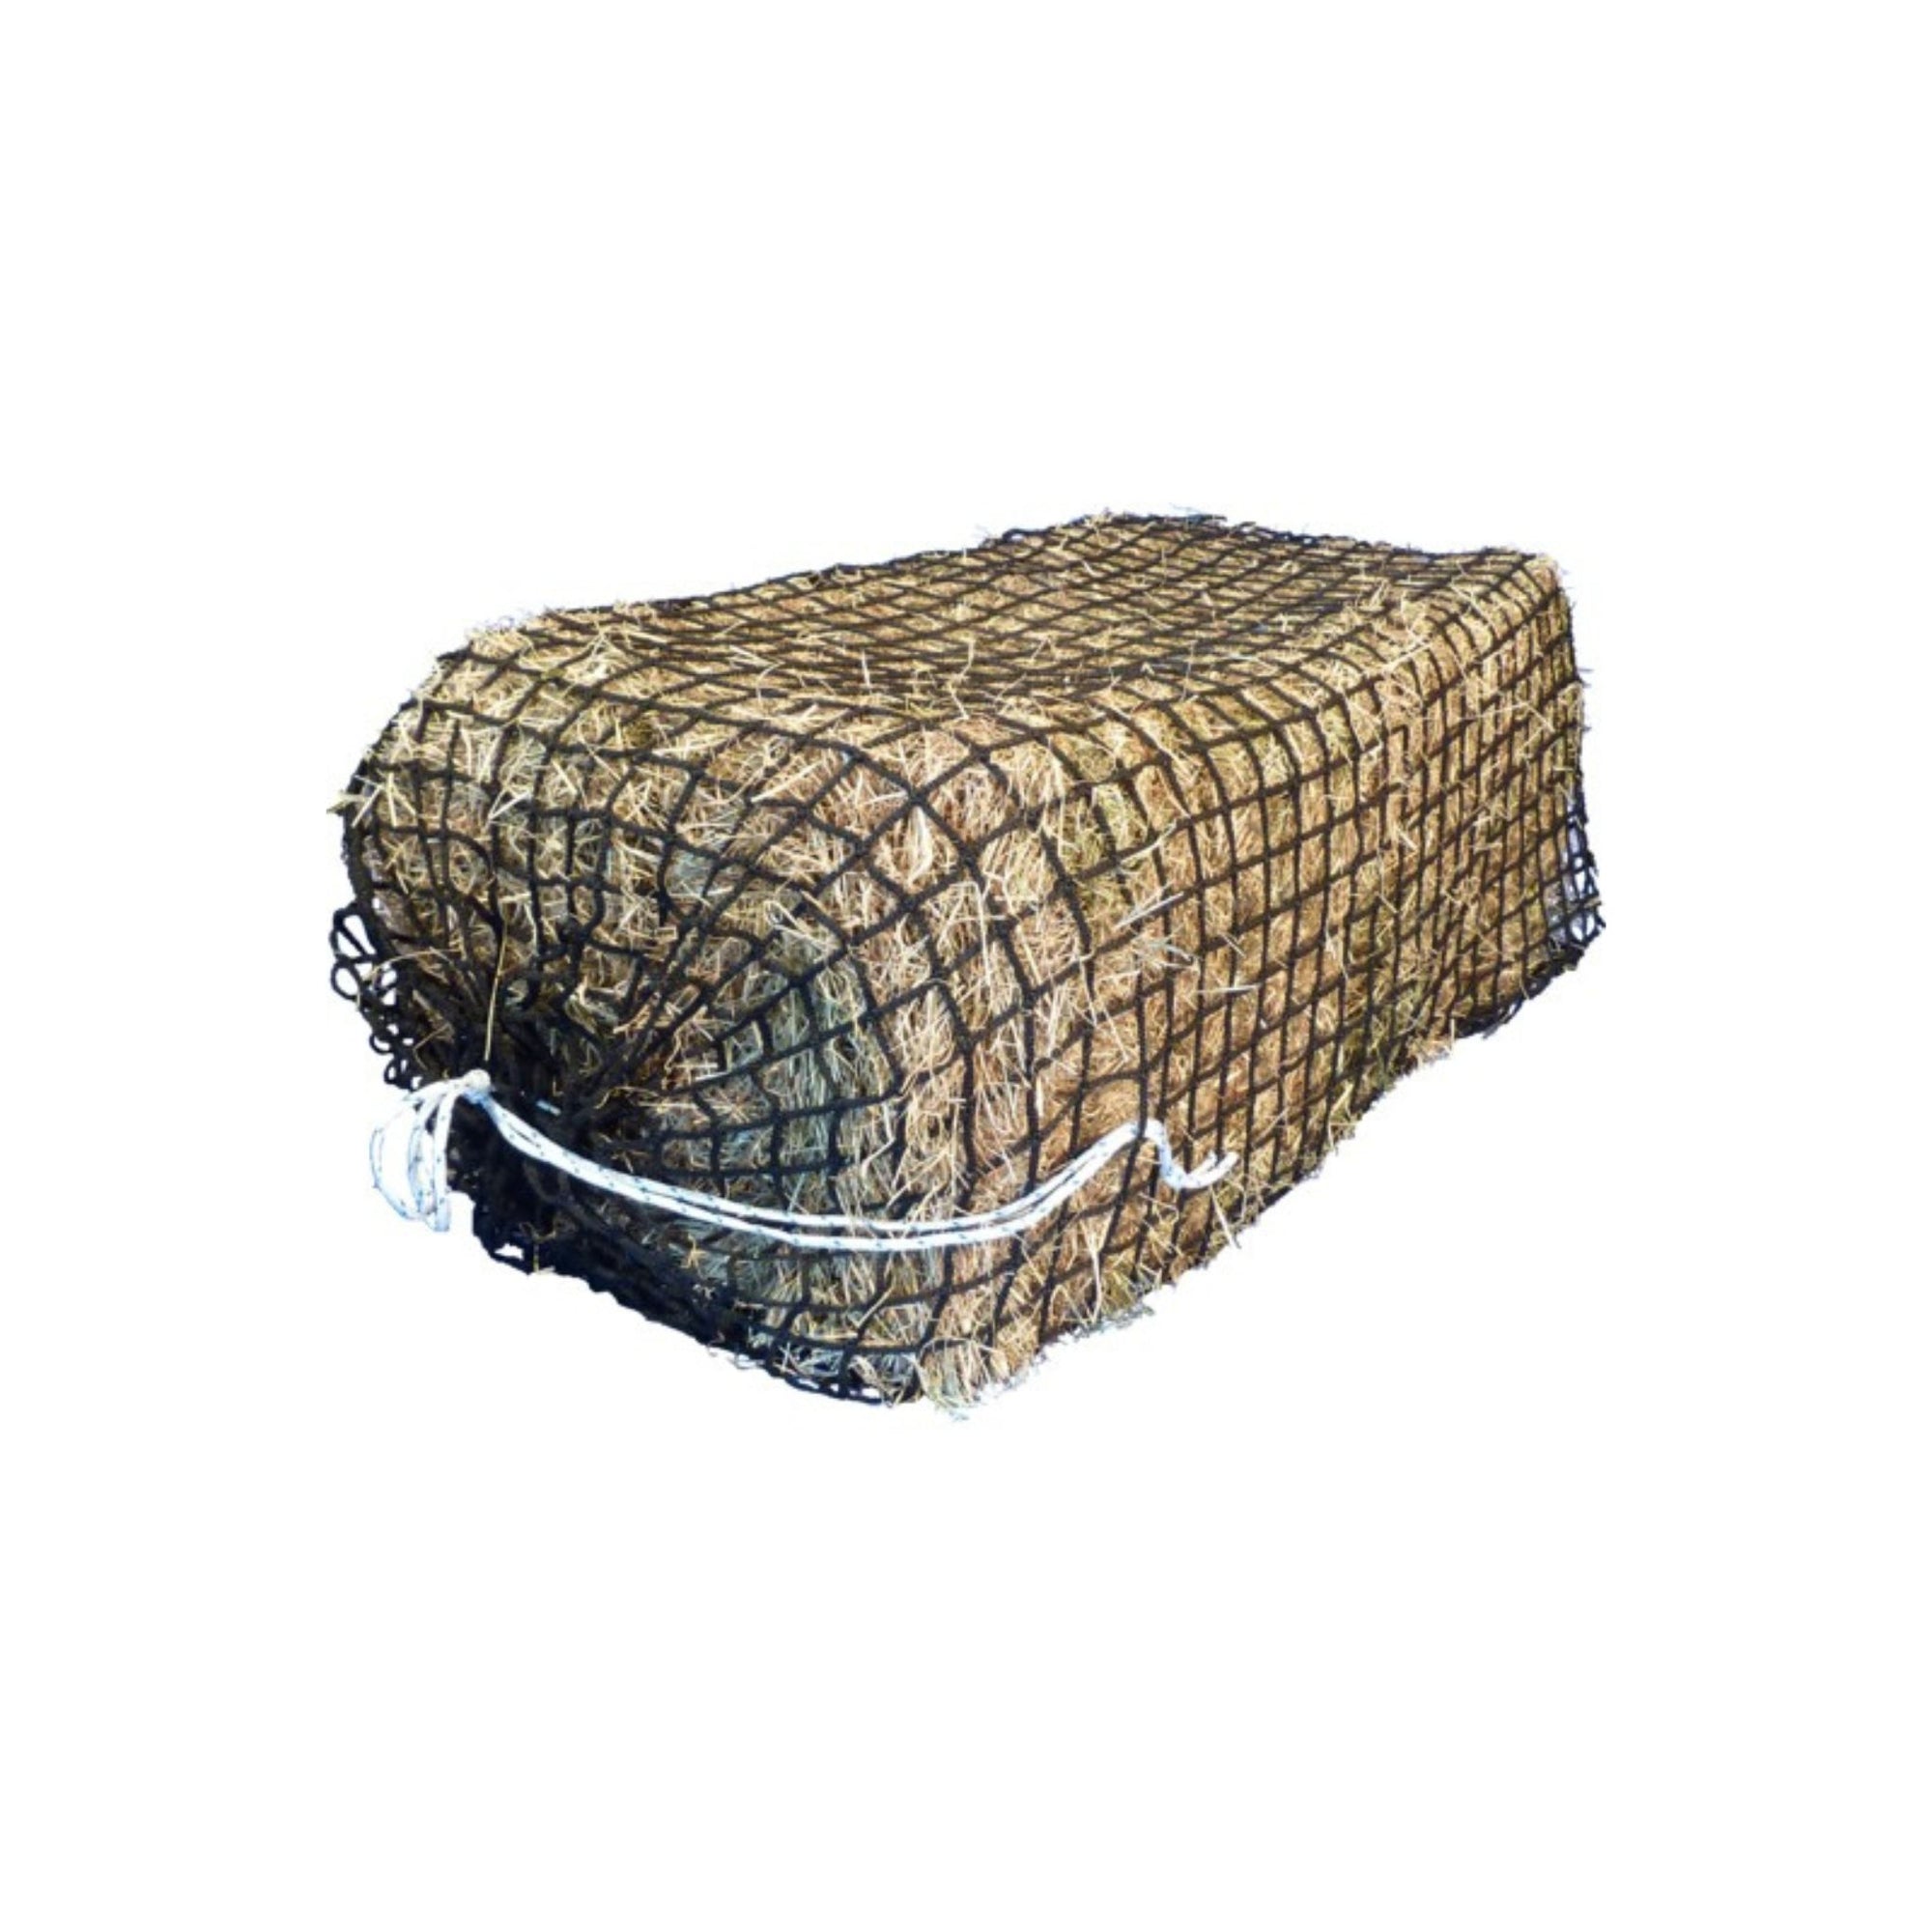 Black hay net with white draw string